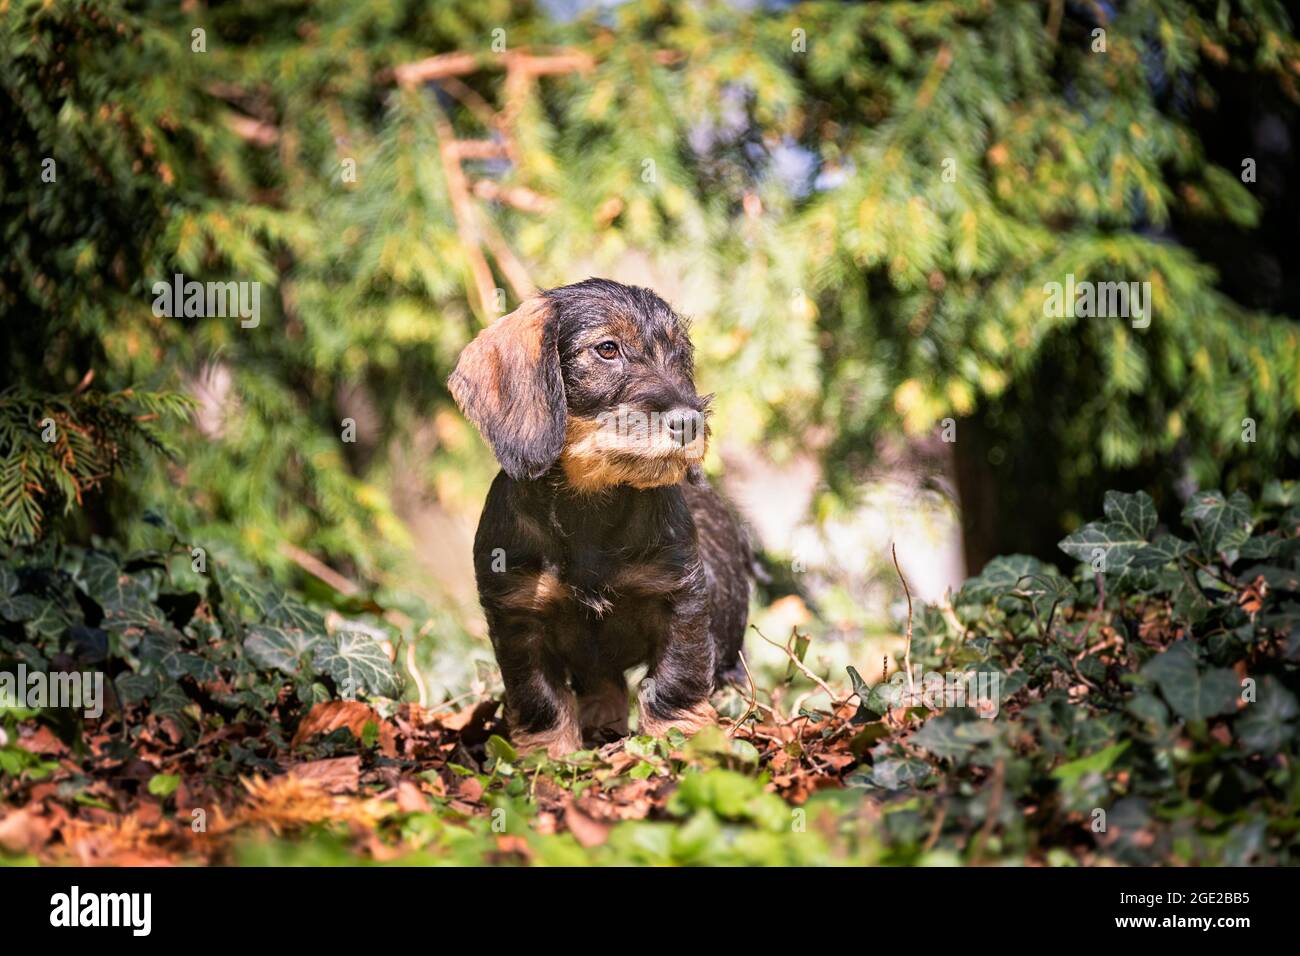 Wire-haired Dachshund. Puppy (3 month old) standing in vegetation. Germany Stock Photo